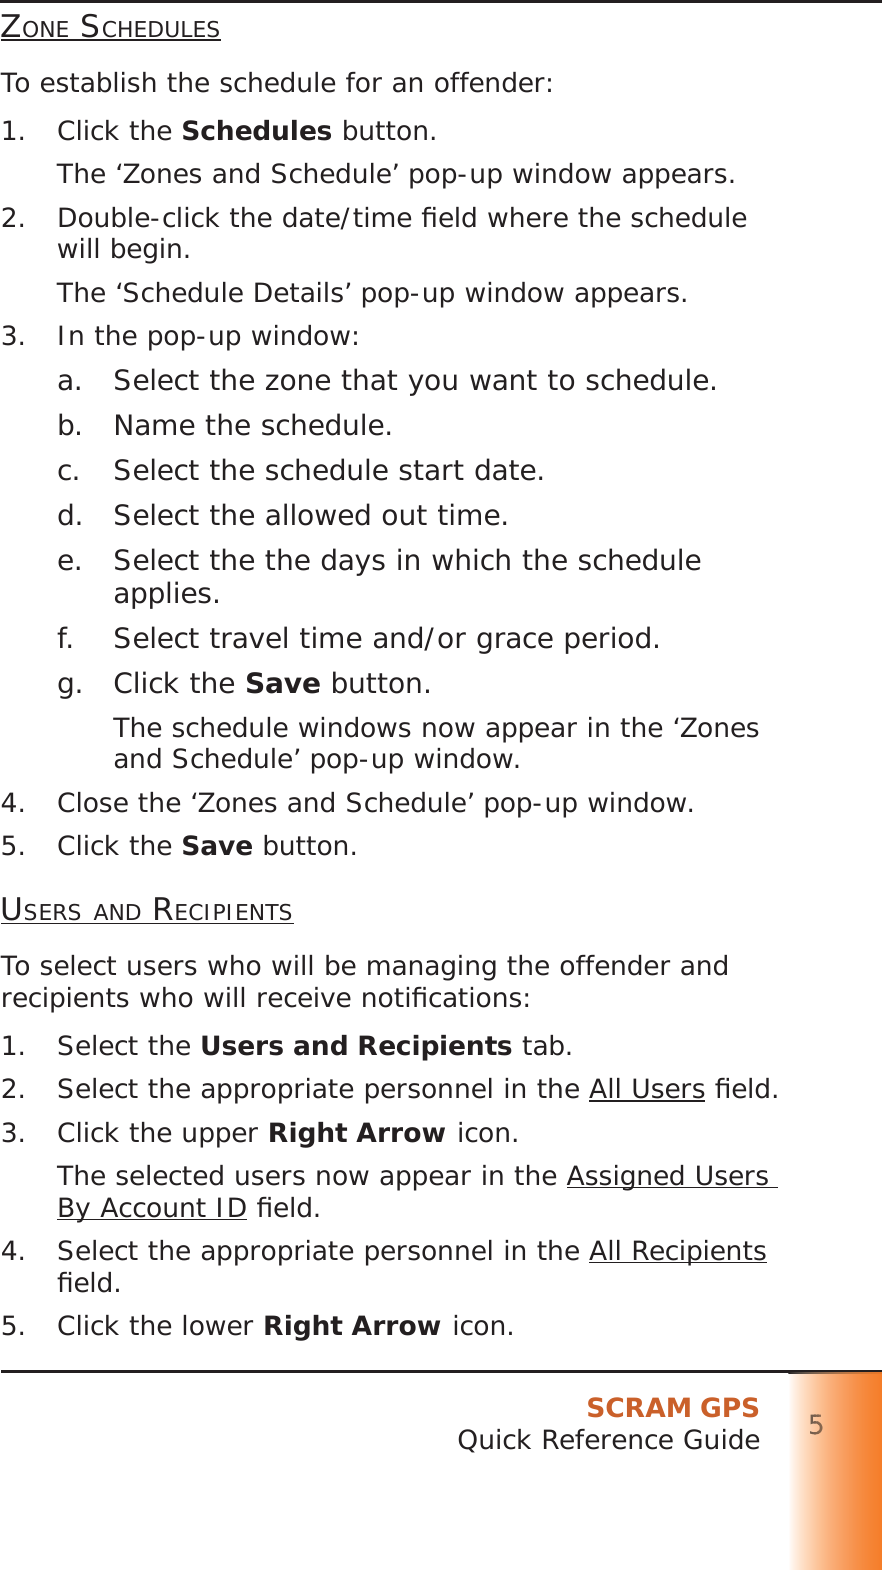 SCRAM GPSQuick Reference Guide 5555555ZONE SCHEDULESTo establish the schedule for an offender:1. Click the Schedules button.The ‘Zones and Schedule’ pop-up window appears.2.  Double-click the date/time ﬁ eld where the schedule will begin.The ‘Schedule Details’ pop-up window appears.3.  In the pop-up window:a.  Select the zone that you want to schedule.b.  Name the schedule.c.  Select the schedule start date.d.  Select the allowed out time.e.  Select the the days in which the schedule applies.f.  Select travel time and/or grace period.g. Click the Save button.The schedule windows now appear in the ‘Zones and Schedule’ pop-up window.4.  Close the ‘Zones and Schedule’ pop-up window.5. Click the Save button.USERS AND RECIPIENTSTo select users who will be managing the offender and recipients who will receive notiﬁ cations:1. Select the Users and Recipients tab.2.  Select the appropriate personnel in the All Users ﬁ eld.3.  Click the upper Right Arrow icon.The selected users now appear in the Assigned Users By Account ID ﬁ eld.4.  Select the appropriate personnel in the All Recipients ﬁ eld.5.  Click the lower Right Arrow icon.